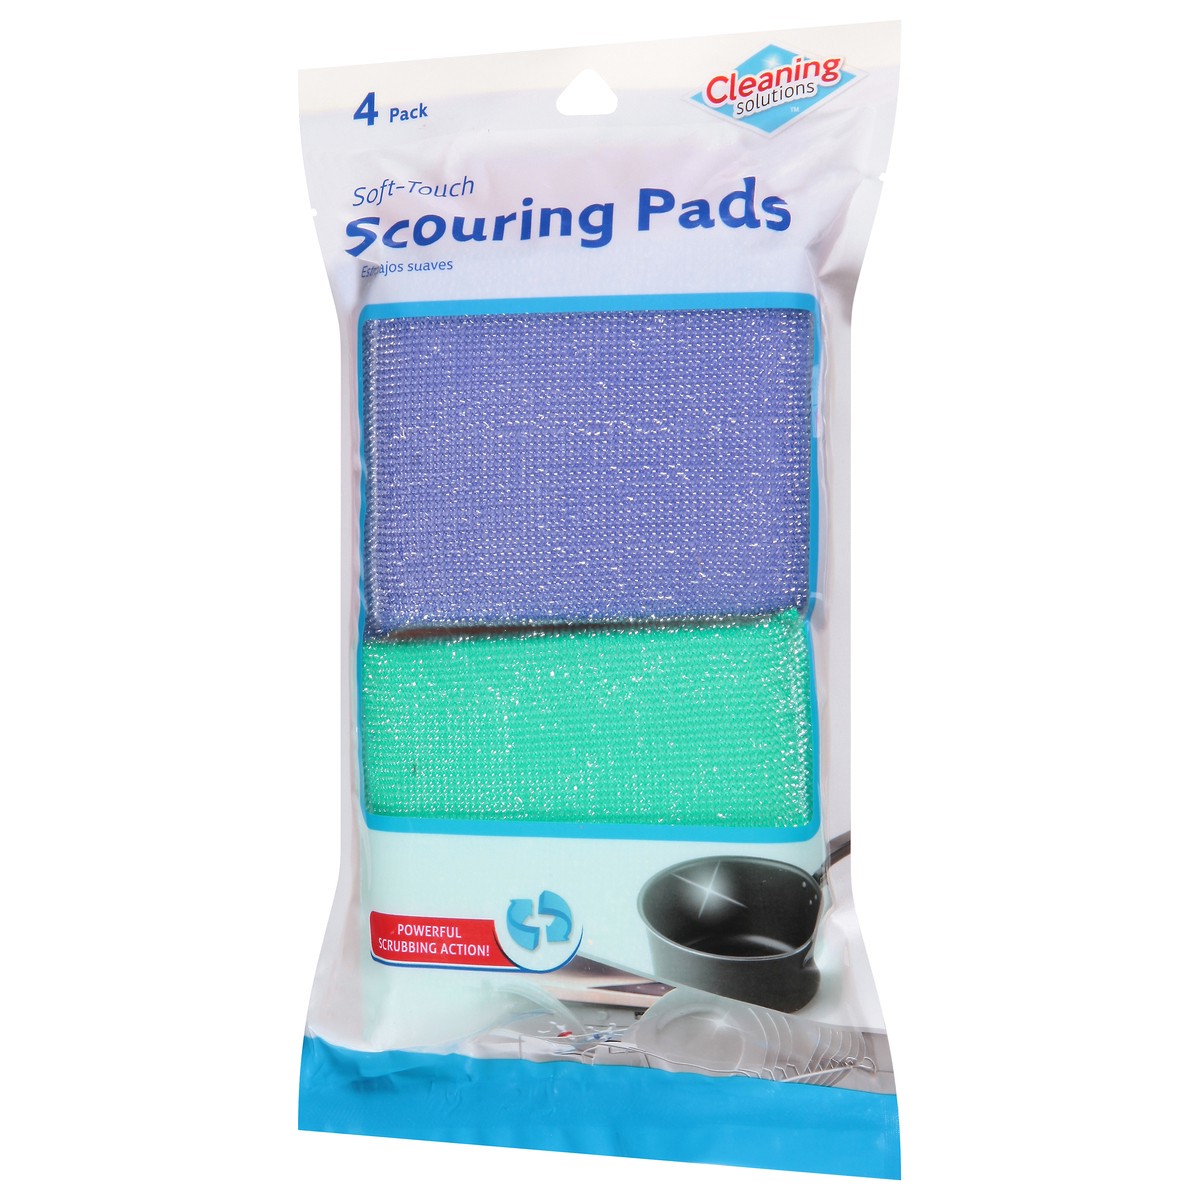 slide 7 of 12, Jacent 4 Pack Soft-Touch Scouring Pads 4 ea, 4 ct